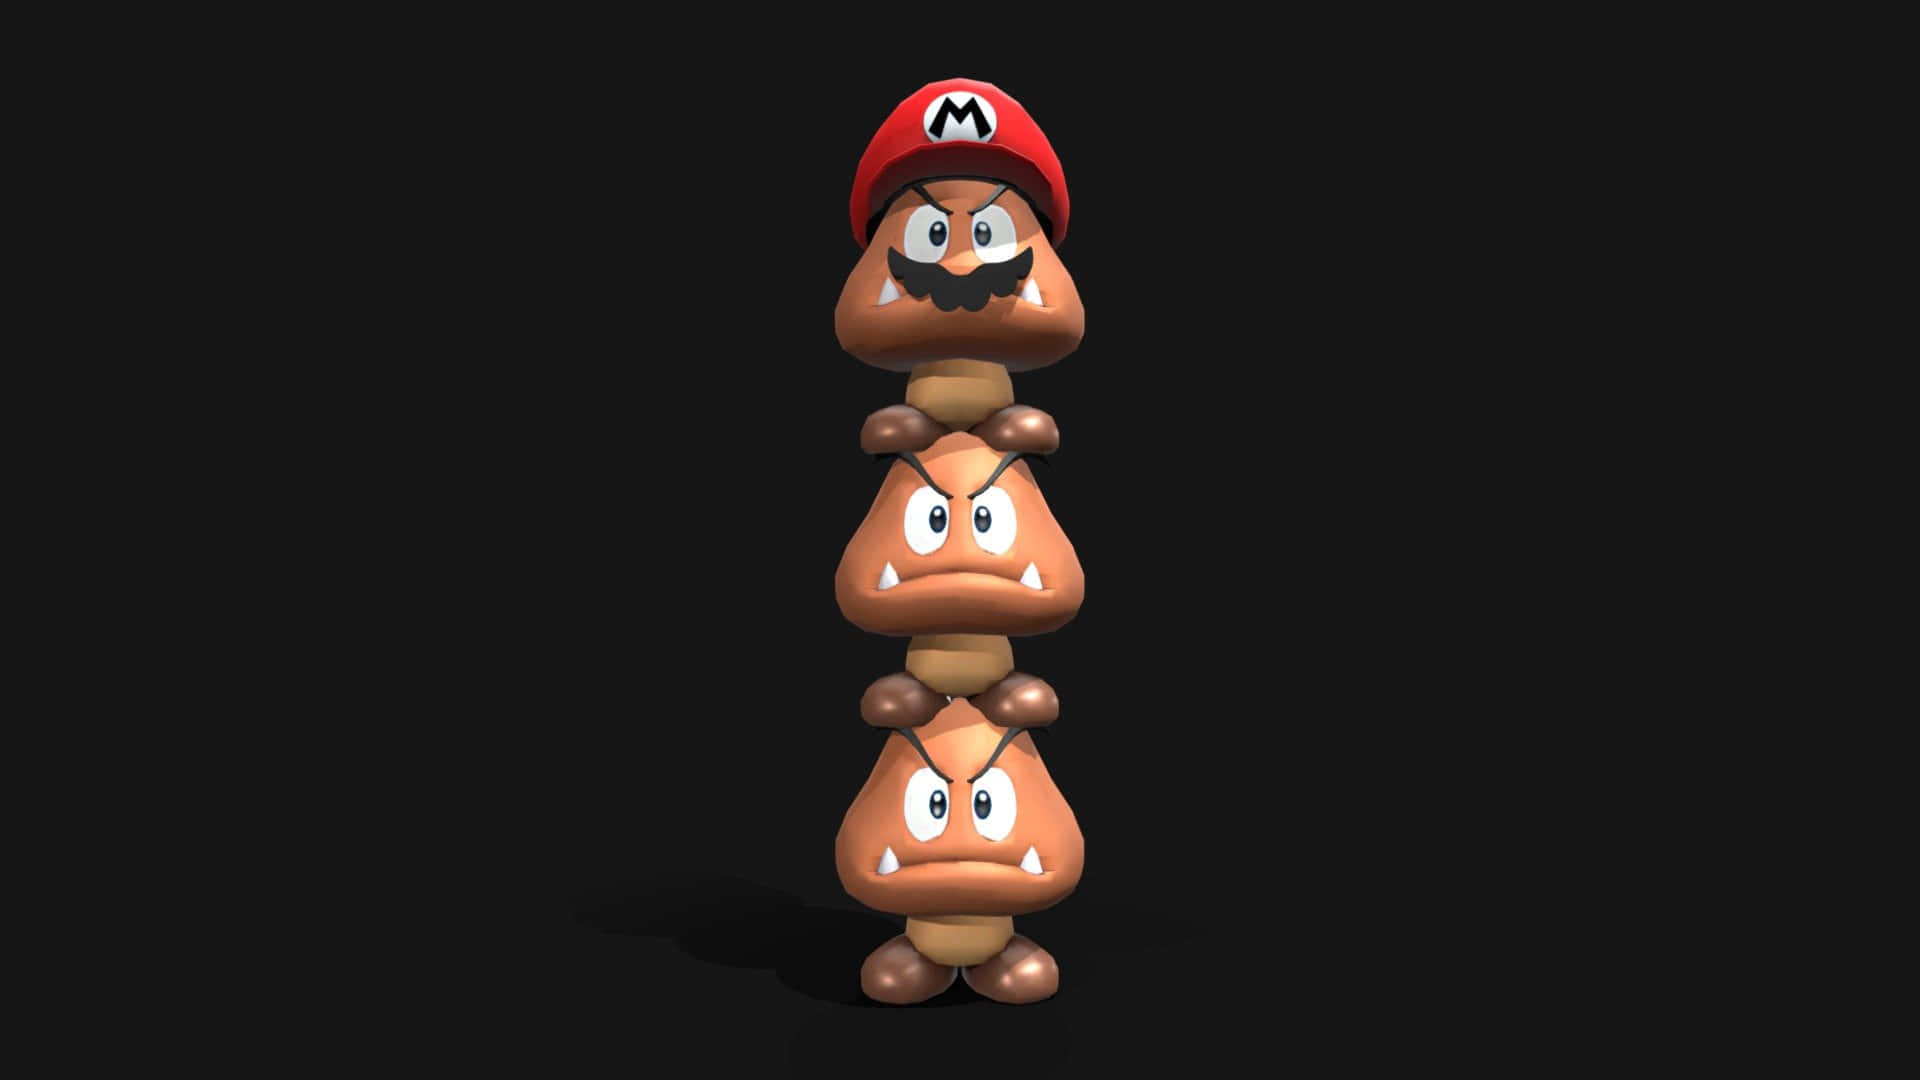 A Goomba - The Classic Enemy from the Super Mario series Wallpaper